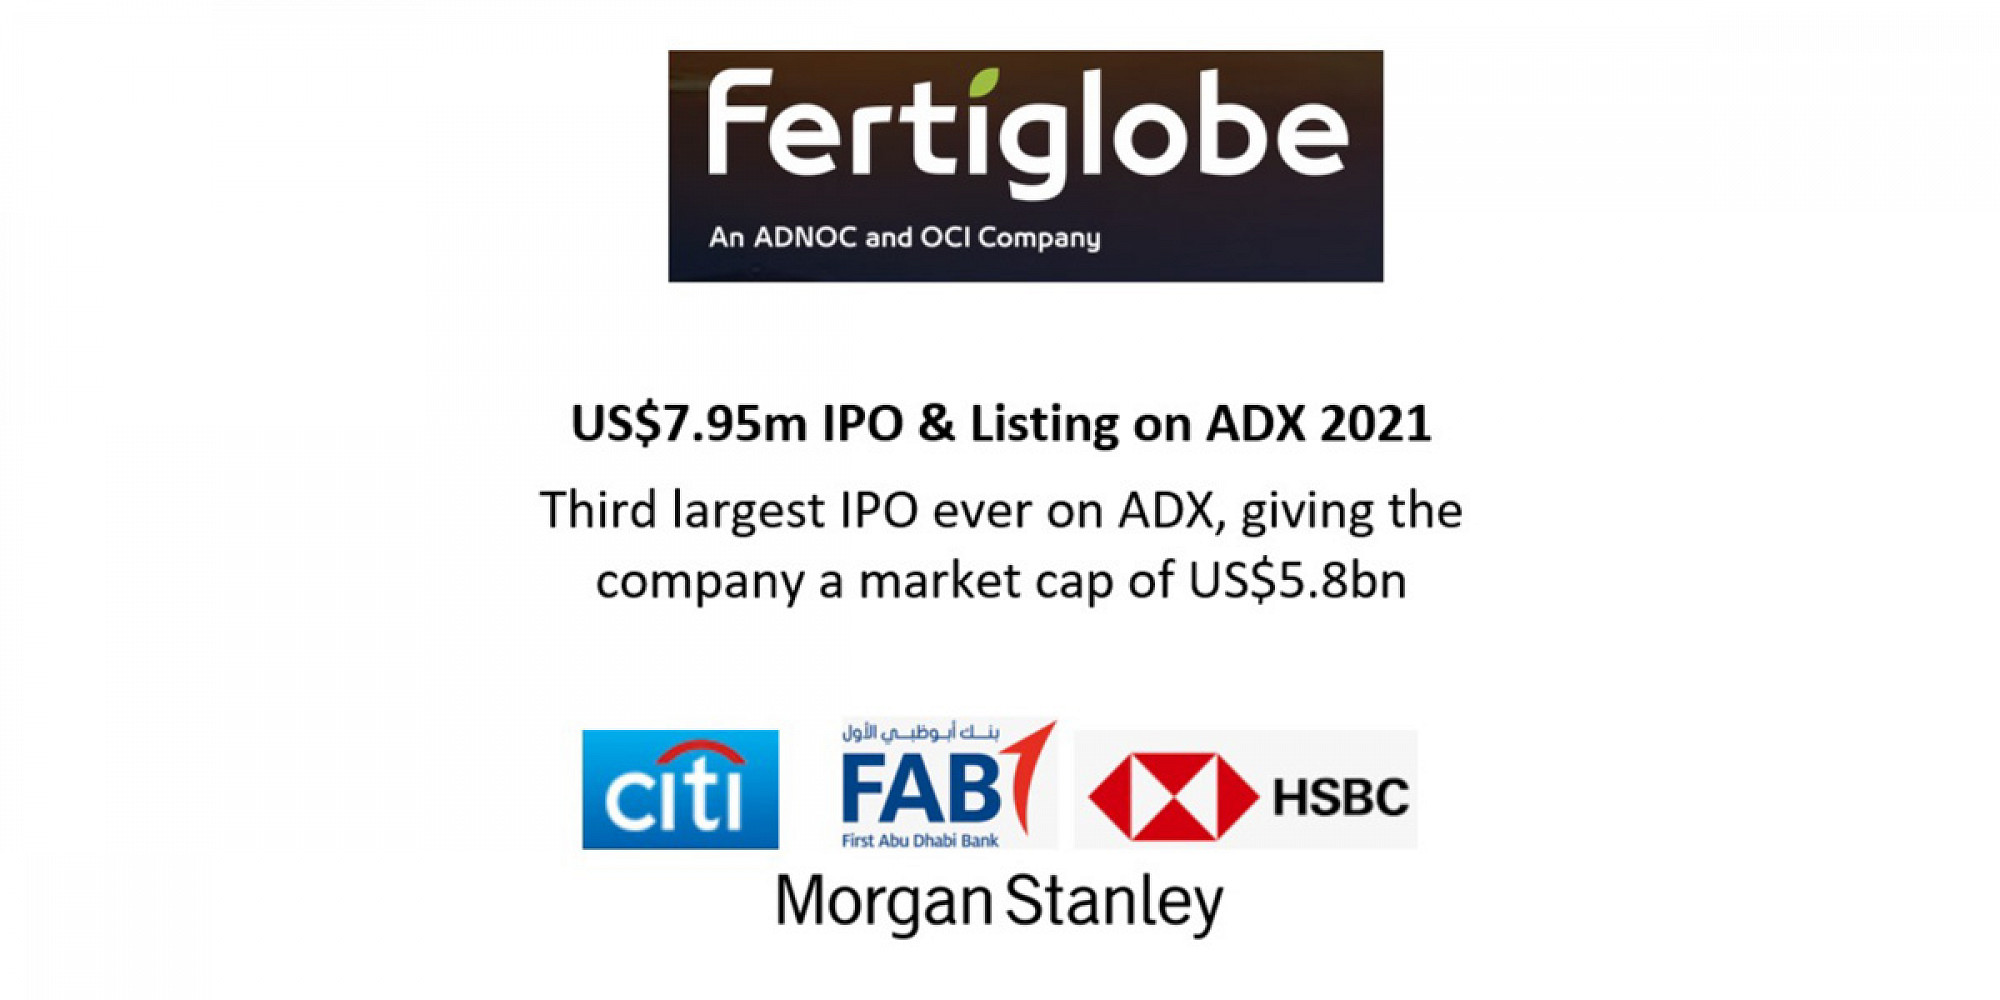 US$7.95m IPO & Listing on ADX 2021